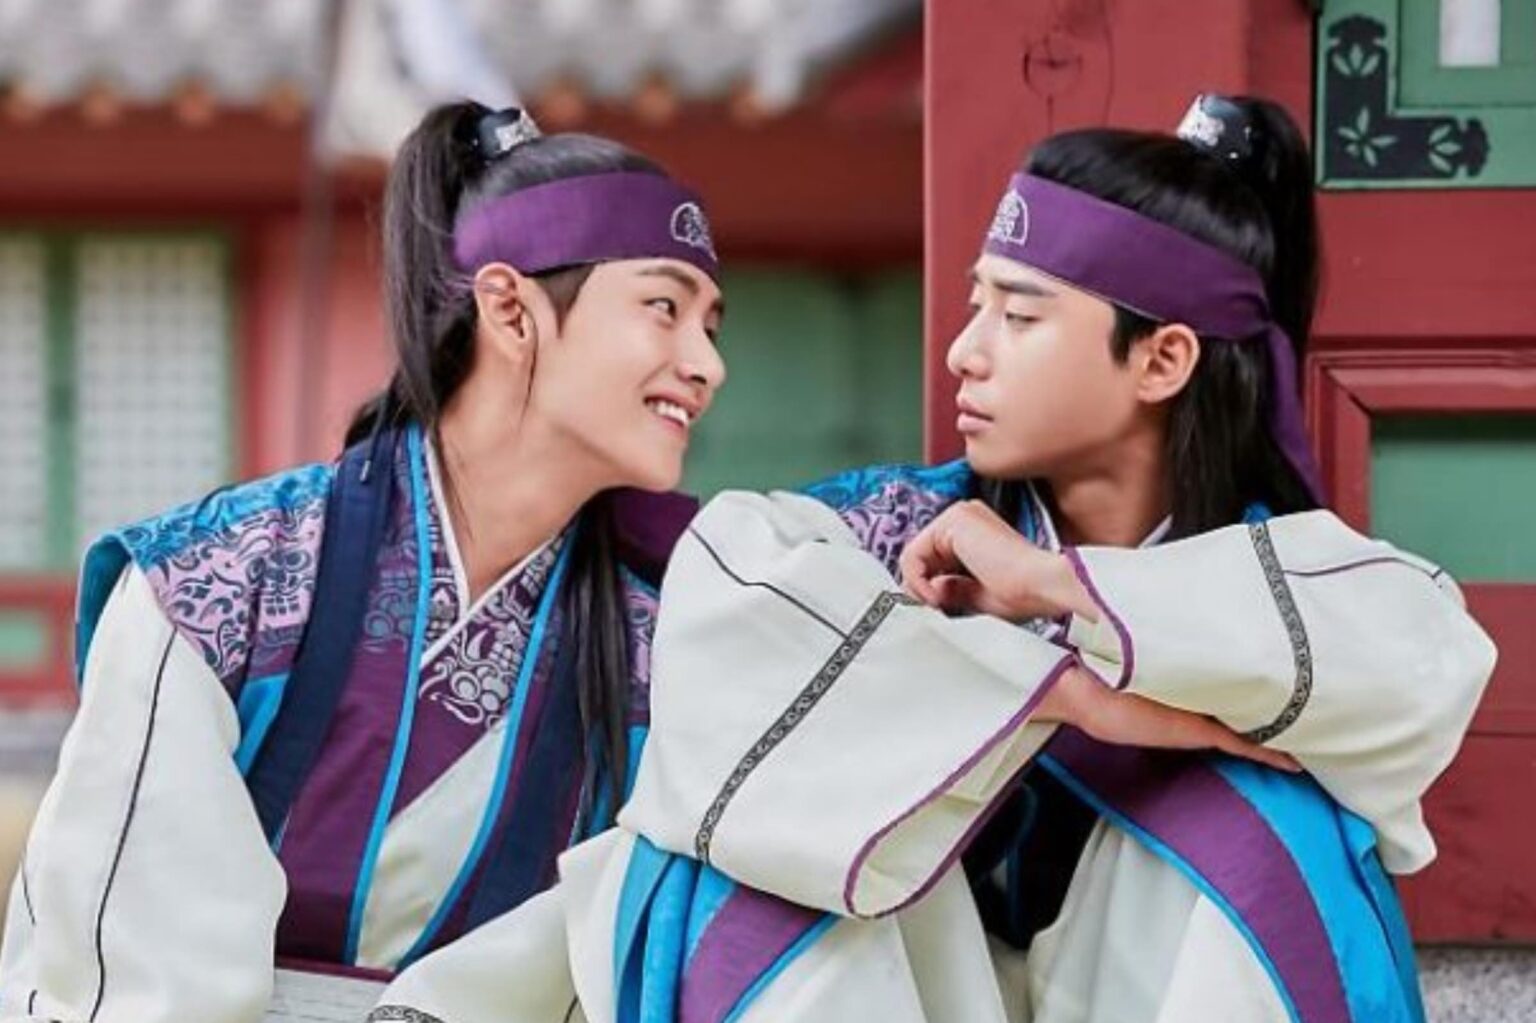 BTS's V may be a talented performer, but he's also a talented actor. Get to know his role in the Korean drama 'Hwarang'.